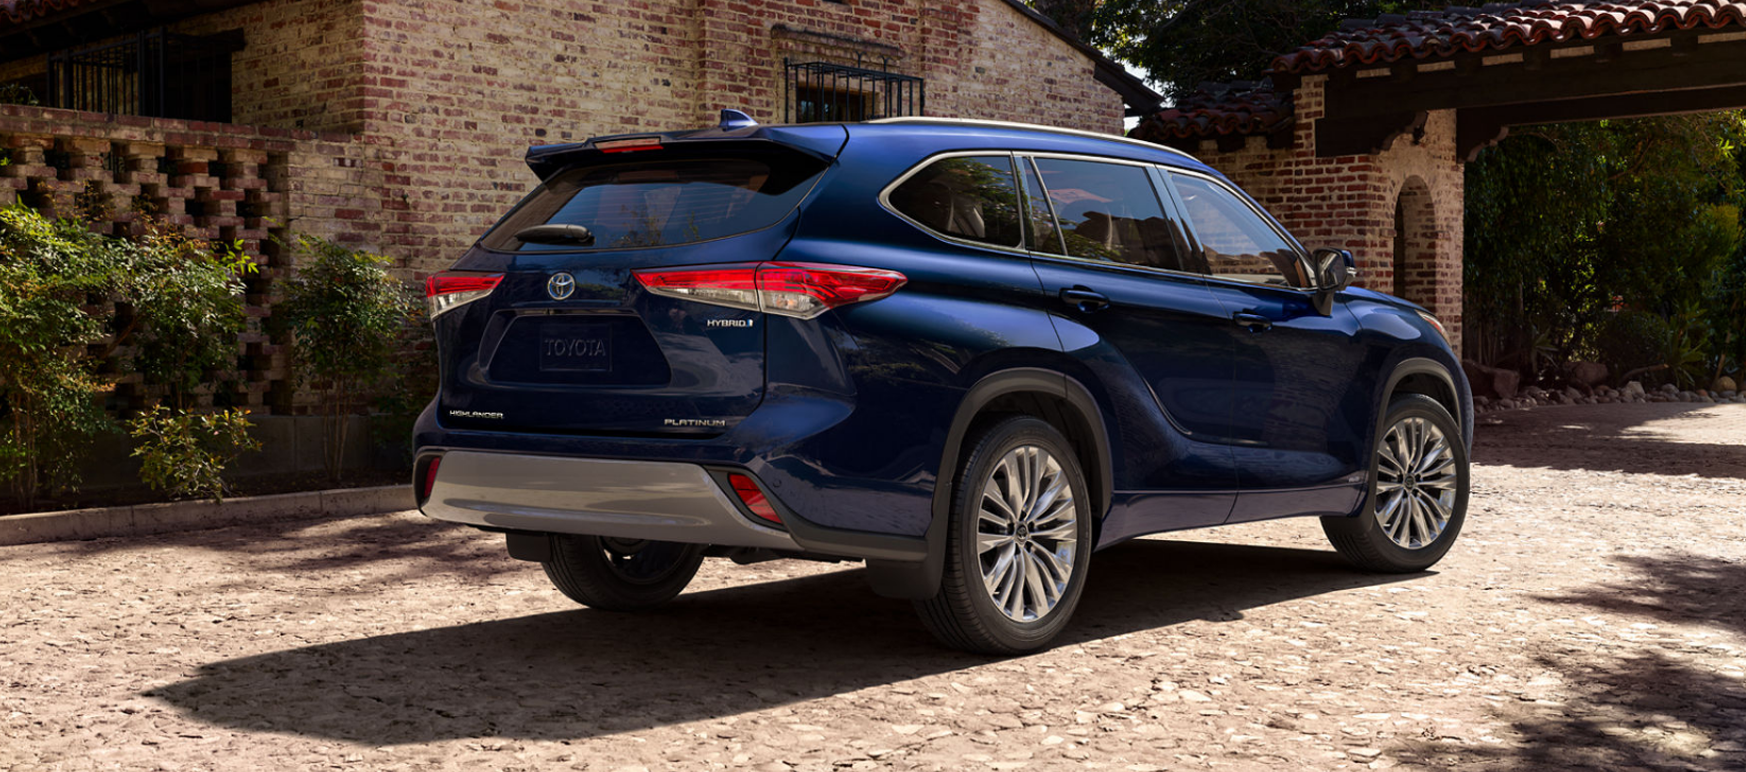 Rear view of a New Toyota Highlander Hybrid Platinum Blue parked on rocky road